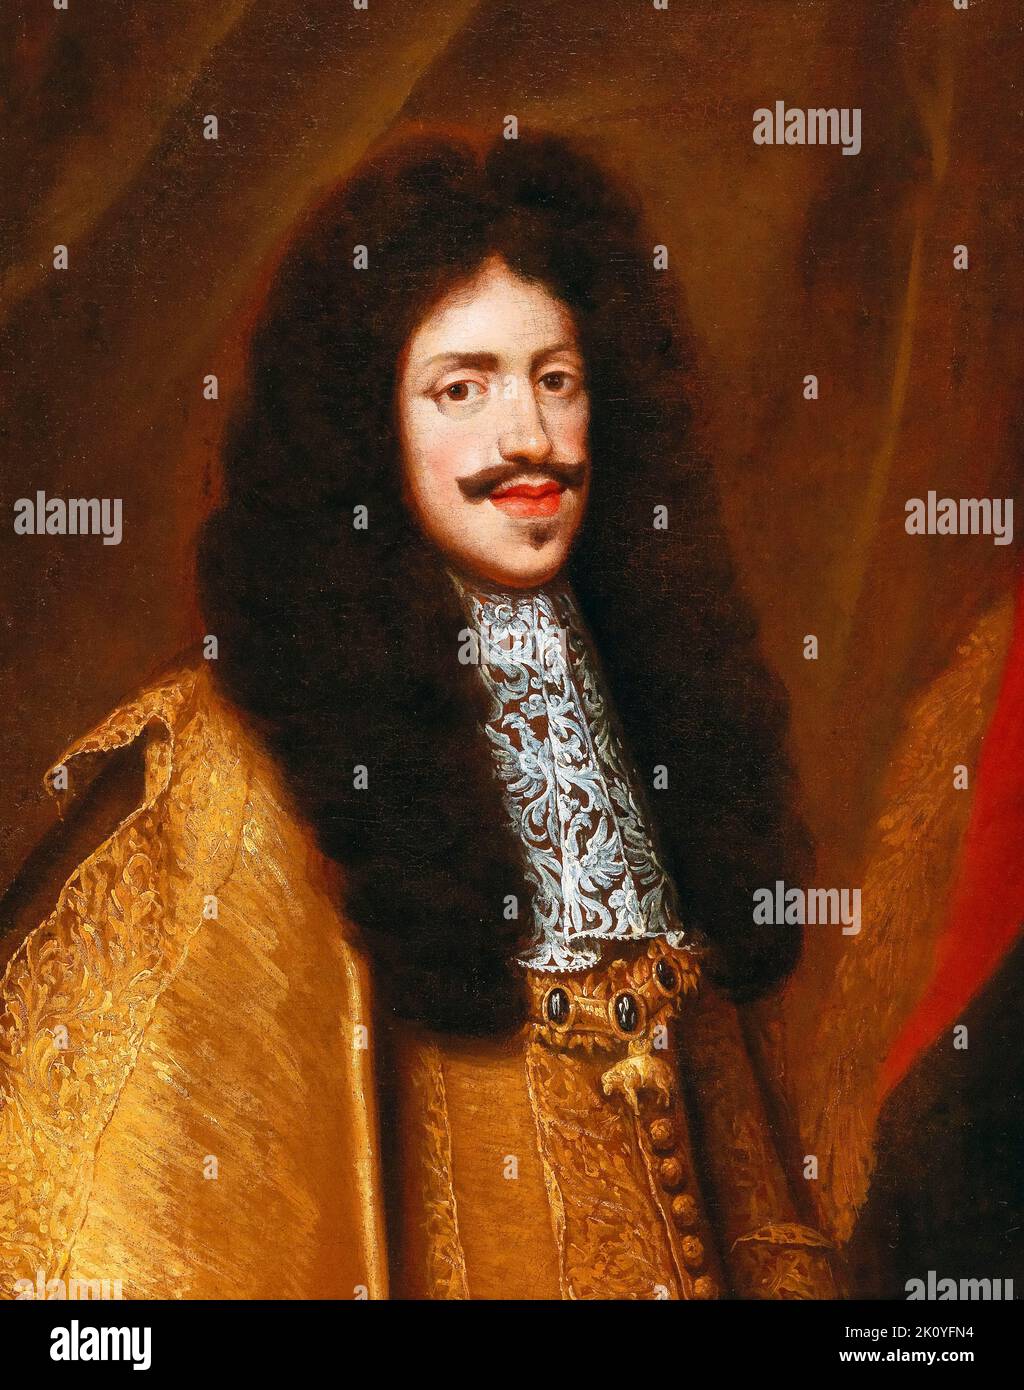 Leopold I (1640-1705), Holy Roman Emperor (1658-1705), wearing the Order of the Golden Fleece, portrait painting in oil by Benjamin Block, before 1690 Stock Photo